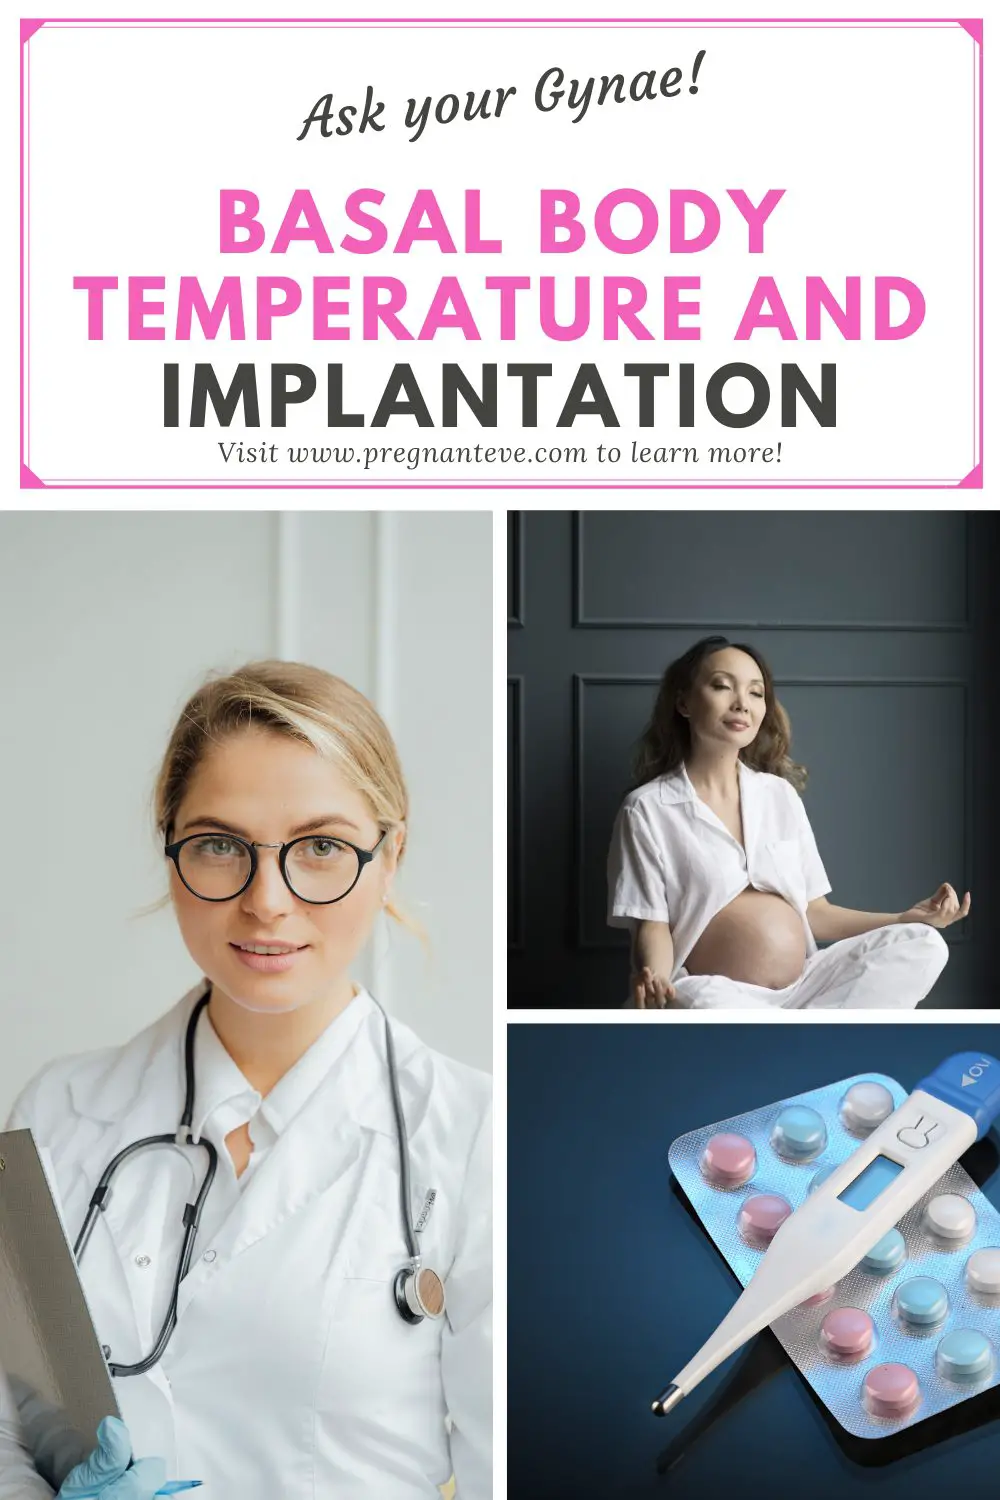  Basal body temperature(BBT) is an indicator of ovulation. However, it is rarely discussed when detection of pregnancy is our concern.